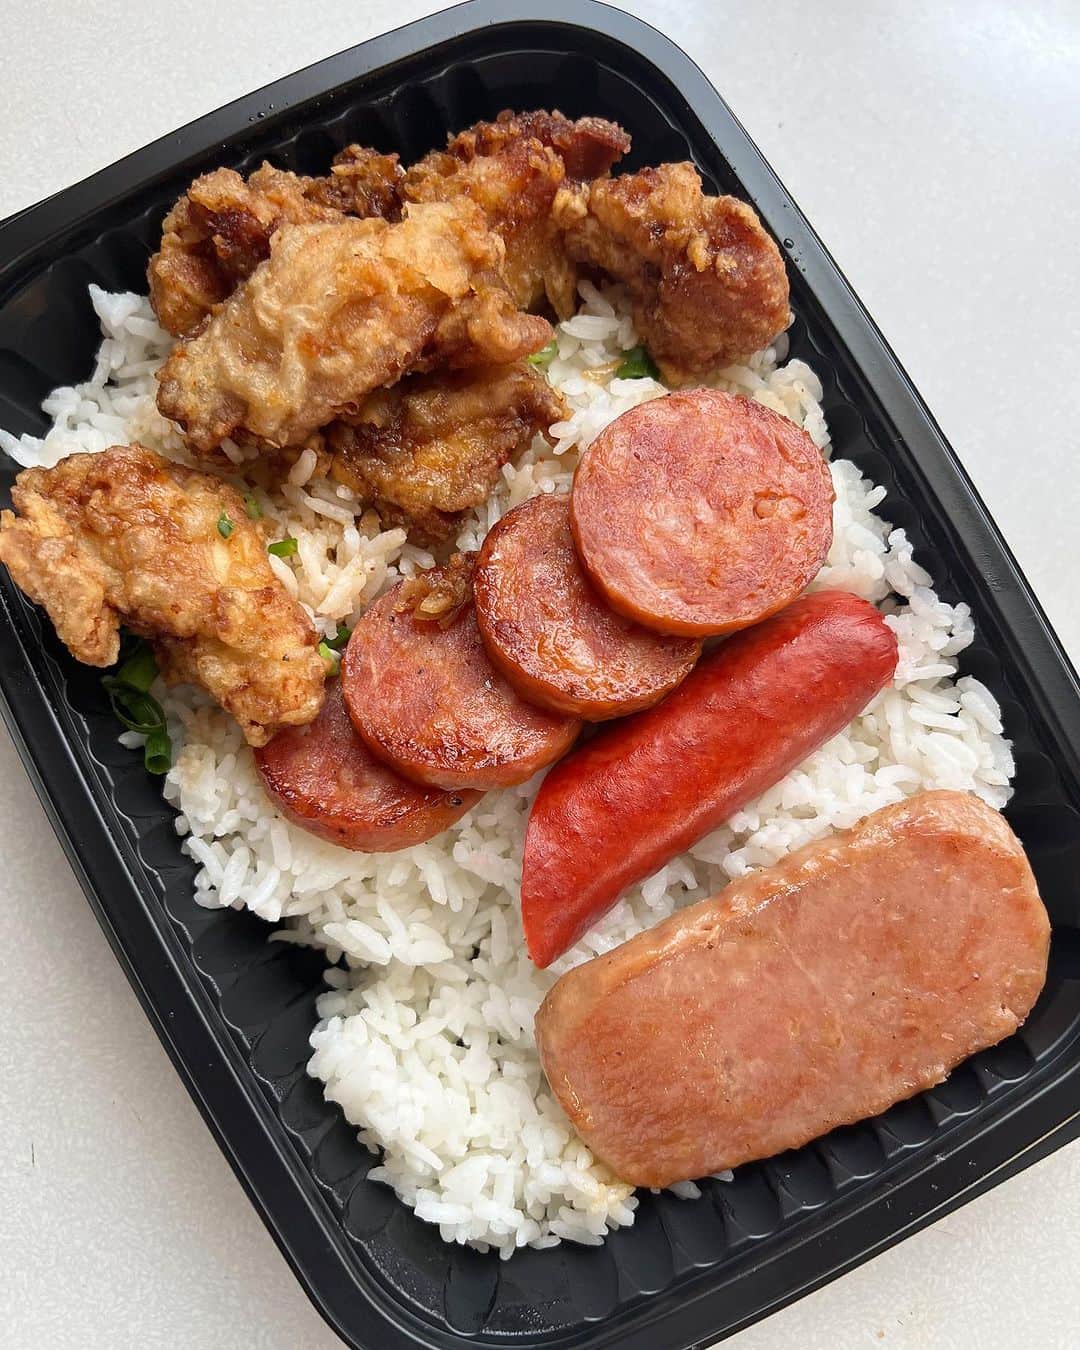 Zippy's Restaurantsのインスタグラム：「Talk about a delicious and easy way to support Maui right now: Get the Kōkua for Maui Pac from @zippys 🤙🏽   It features a slice of Spam, a red hot dog, Portuguese sausage and Korean chicken on a bed of rice. 😋   For each Kōkua for Maui Pac sold, @zippys will donate $2 ✌🏼 to the Maui Strong Fund of @hawaiicommunityfoundation from Sept. 1 to Dec. 31. … #mauistrong #nextstopzippys #zippys #zippysambassador #platelunch #hawaiifoodie #hawaiifood #hawaiieats #onokinegrindz #localkinegrindz #supportlocalhawaii #supportmaui」